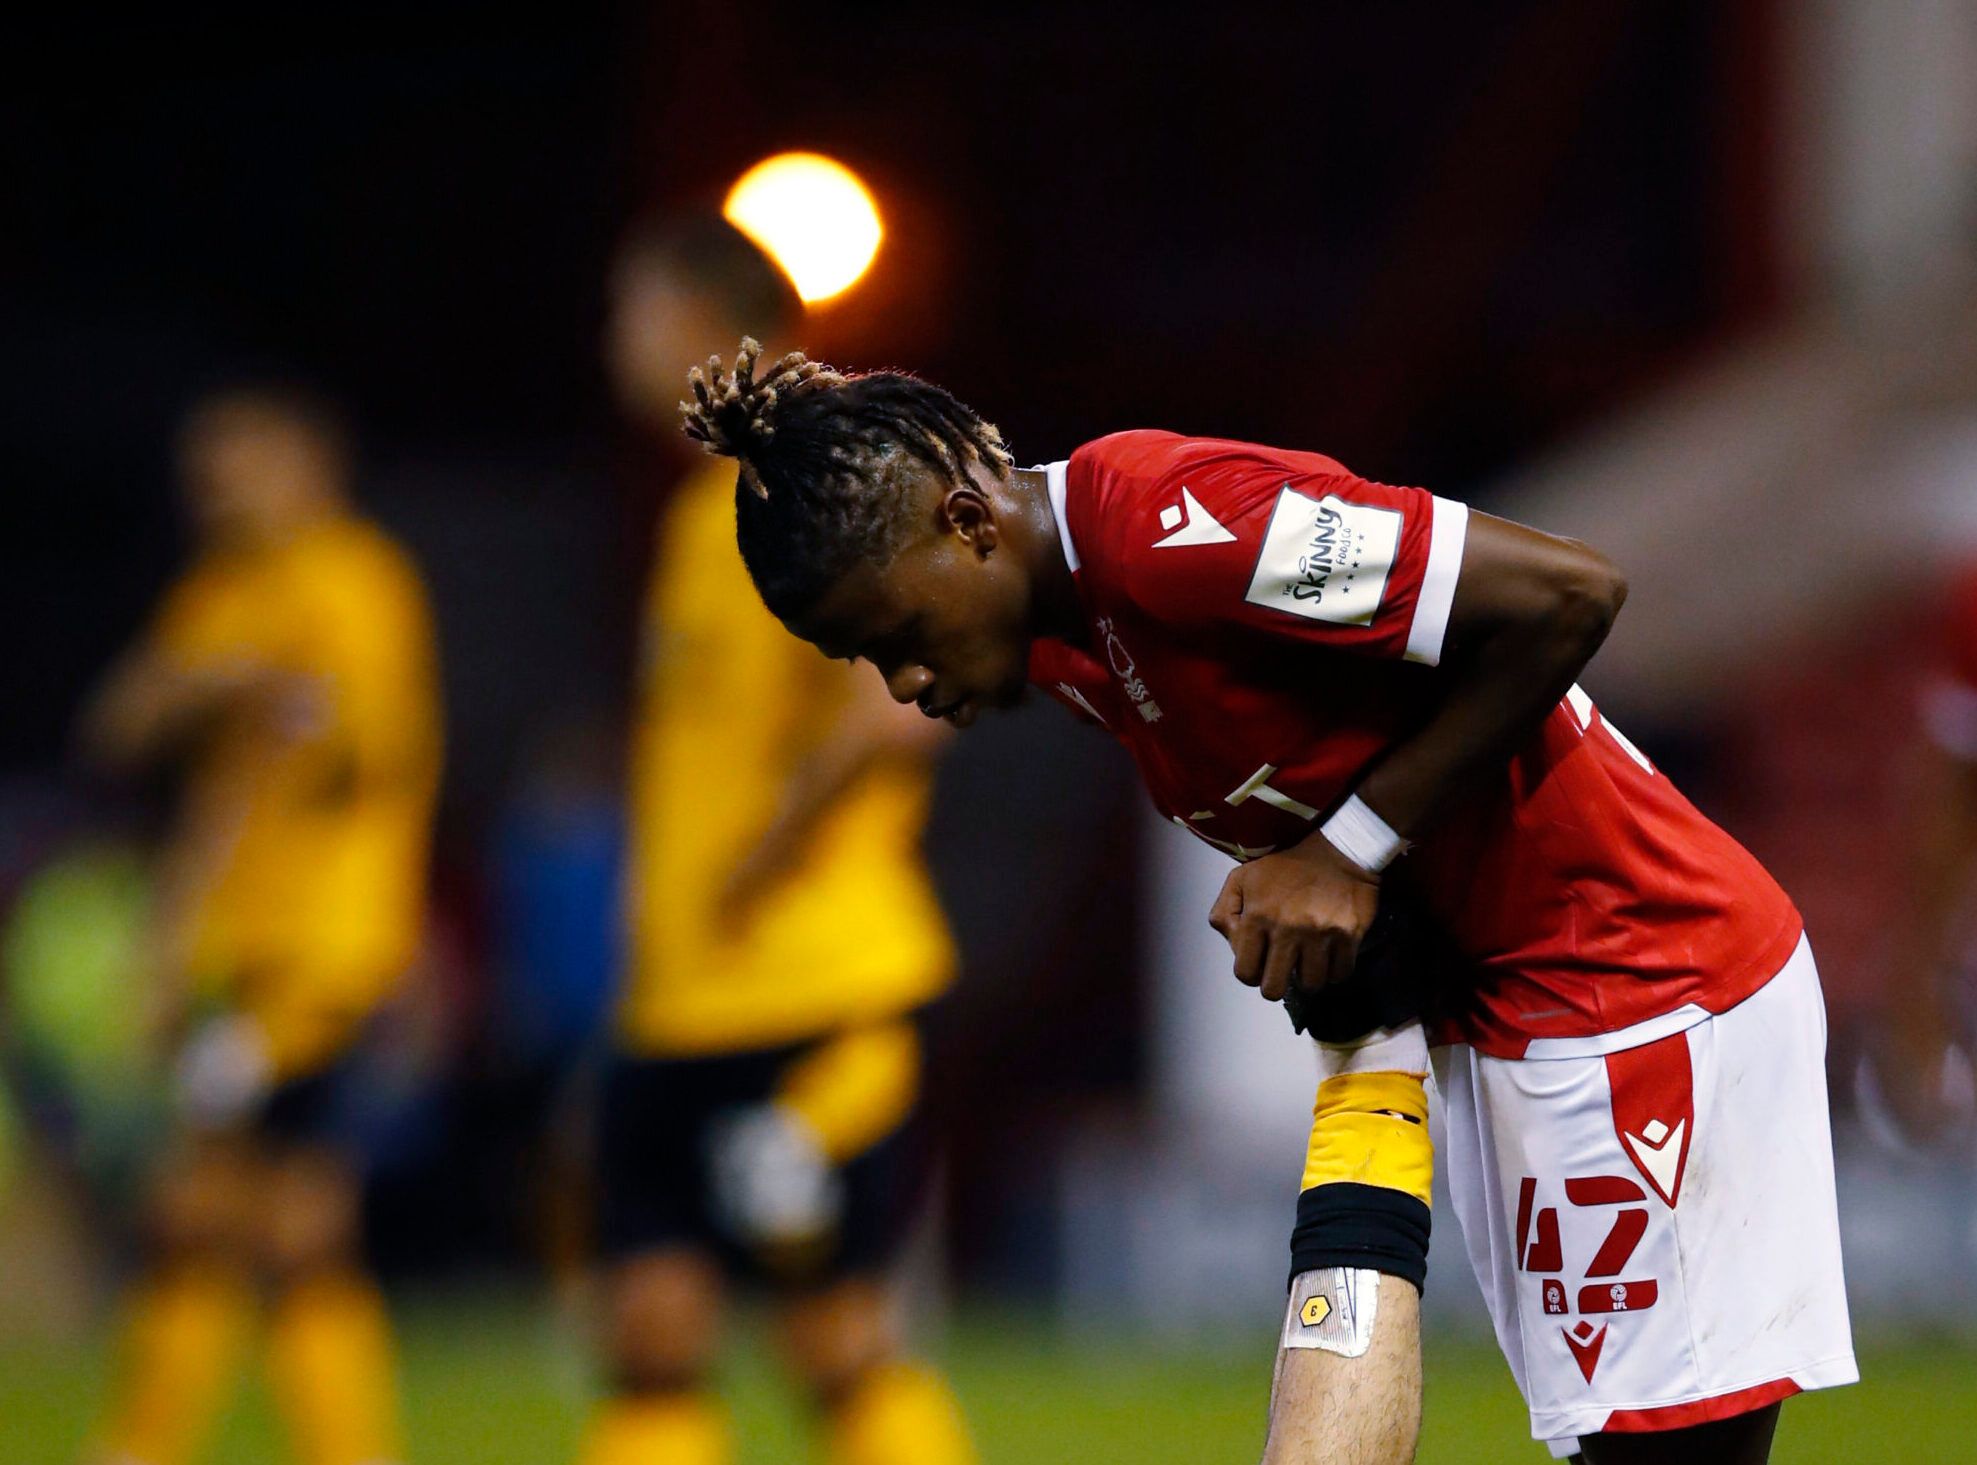 Soccer - England - Carabao Cup Second Round - Nottingham Forest v Wolverhampton Wanderers - The City Ground, Nottingham, Britain - August 24, 2021 Wolverhampton Wanderers' Rayan Ait-Nouri is helped to stretch by Nottingham Forest's Ateef Konate Action Images via Reuters/Andrew Boyers